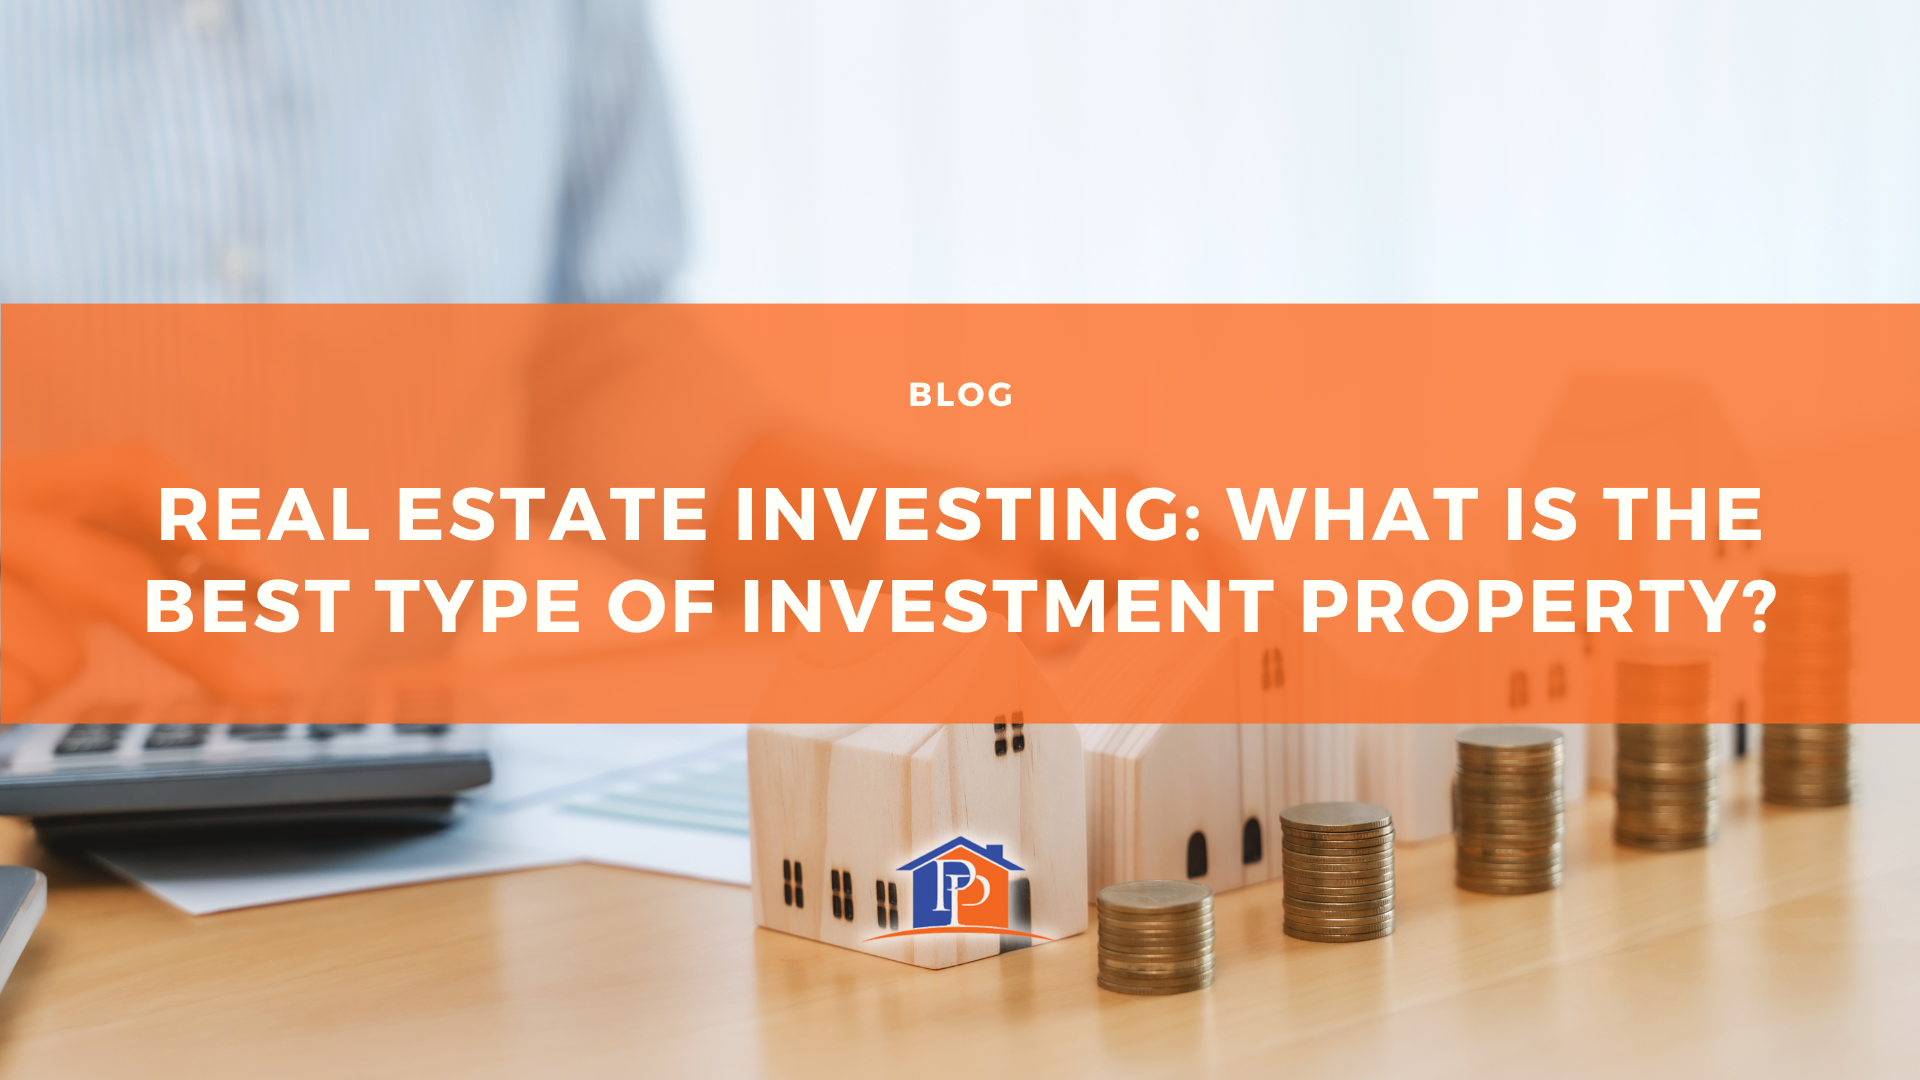 Real Estate Investing: What Is the Best Type of Investment Property?